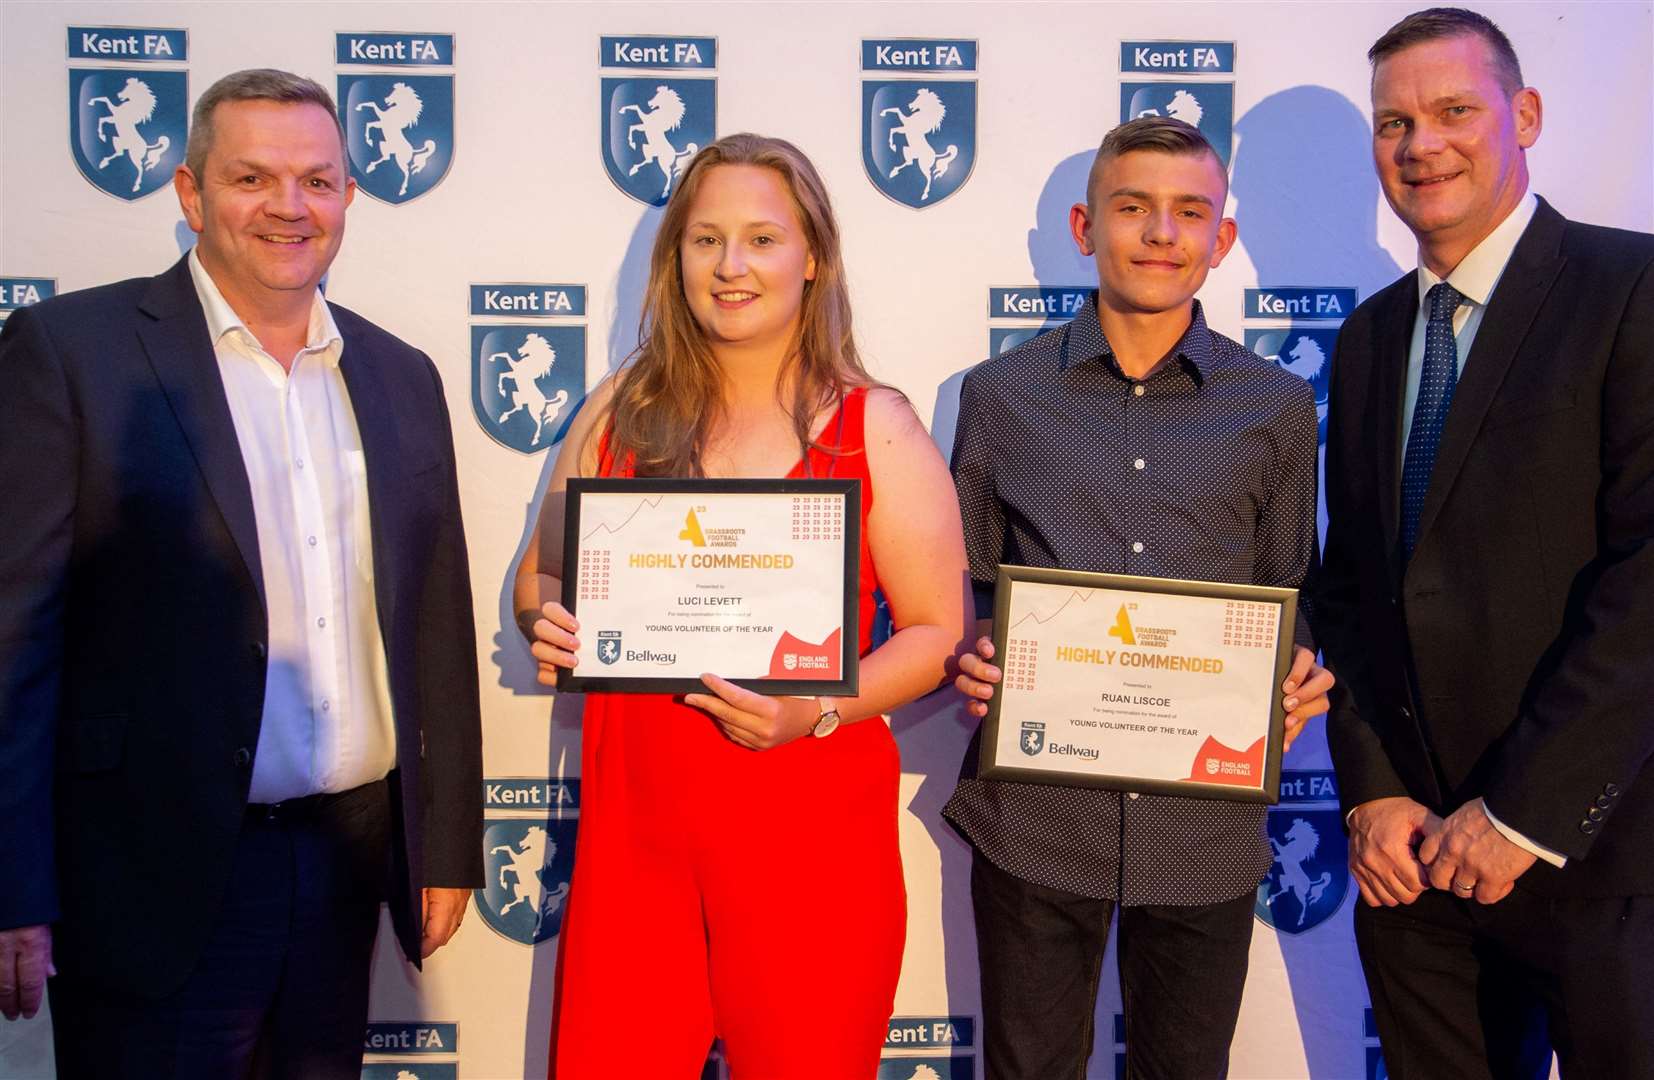 Both Cranbrook Juniors’ Luci Levett and Ruan Liscoe, of Medway Town, were highly commended for their work. Picture: Ian Scammell